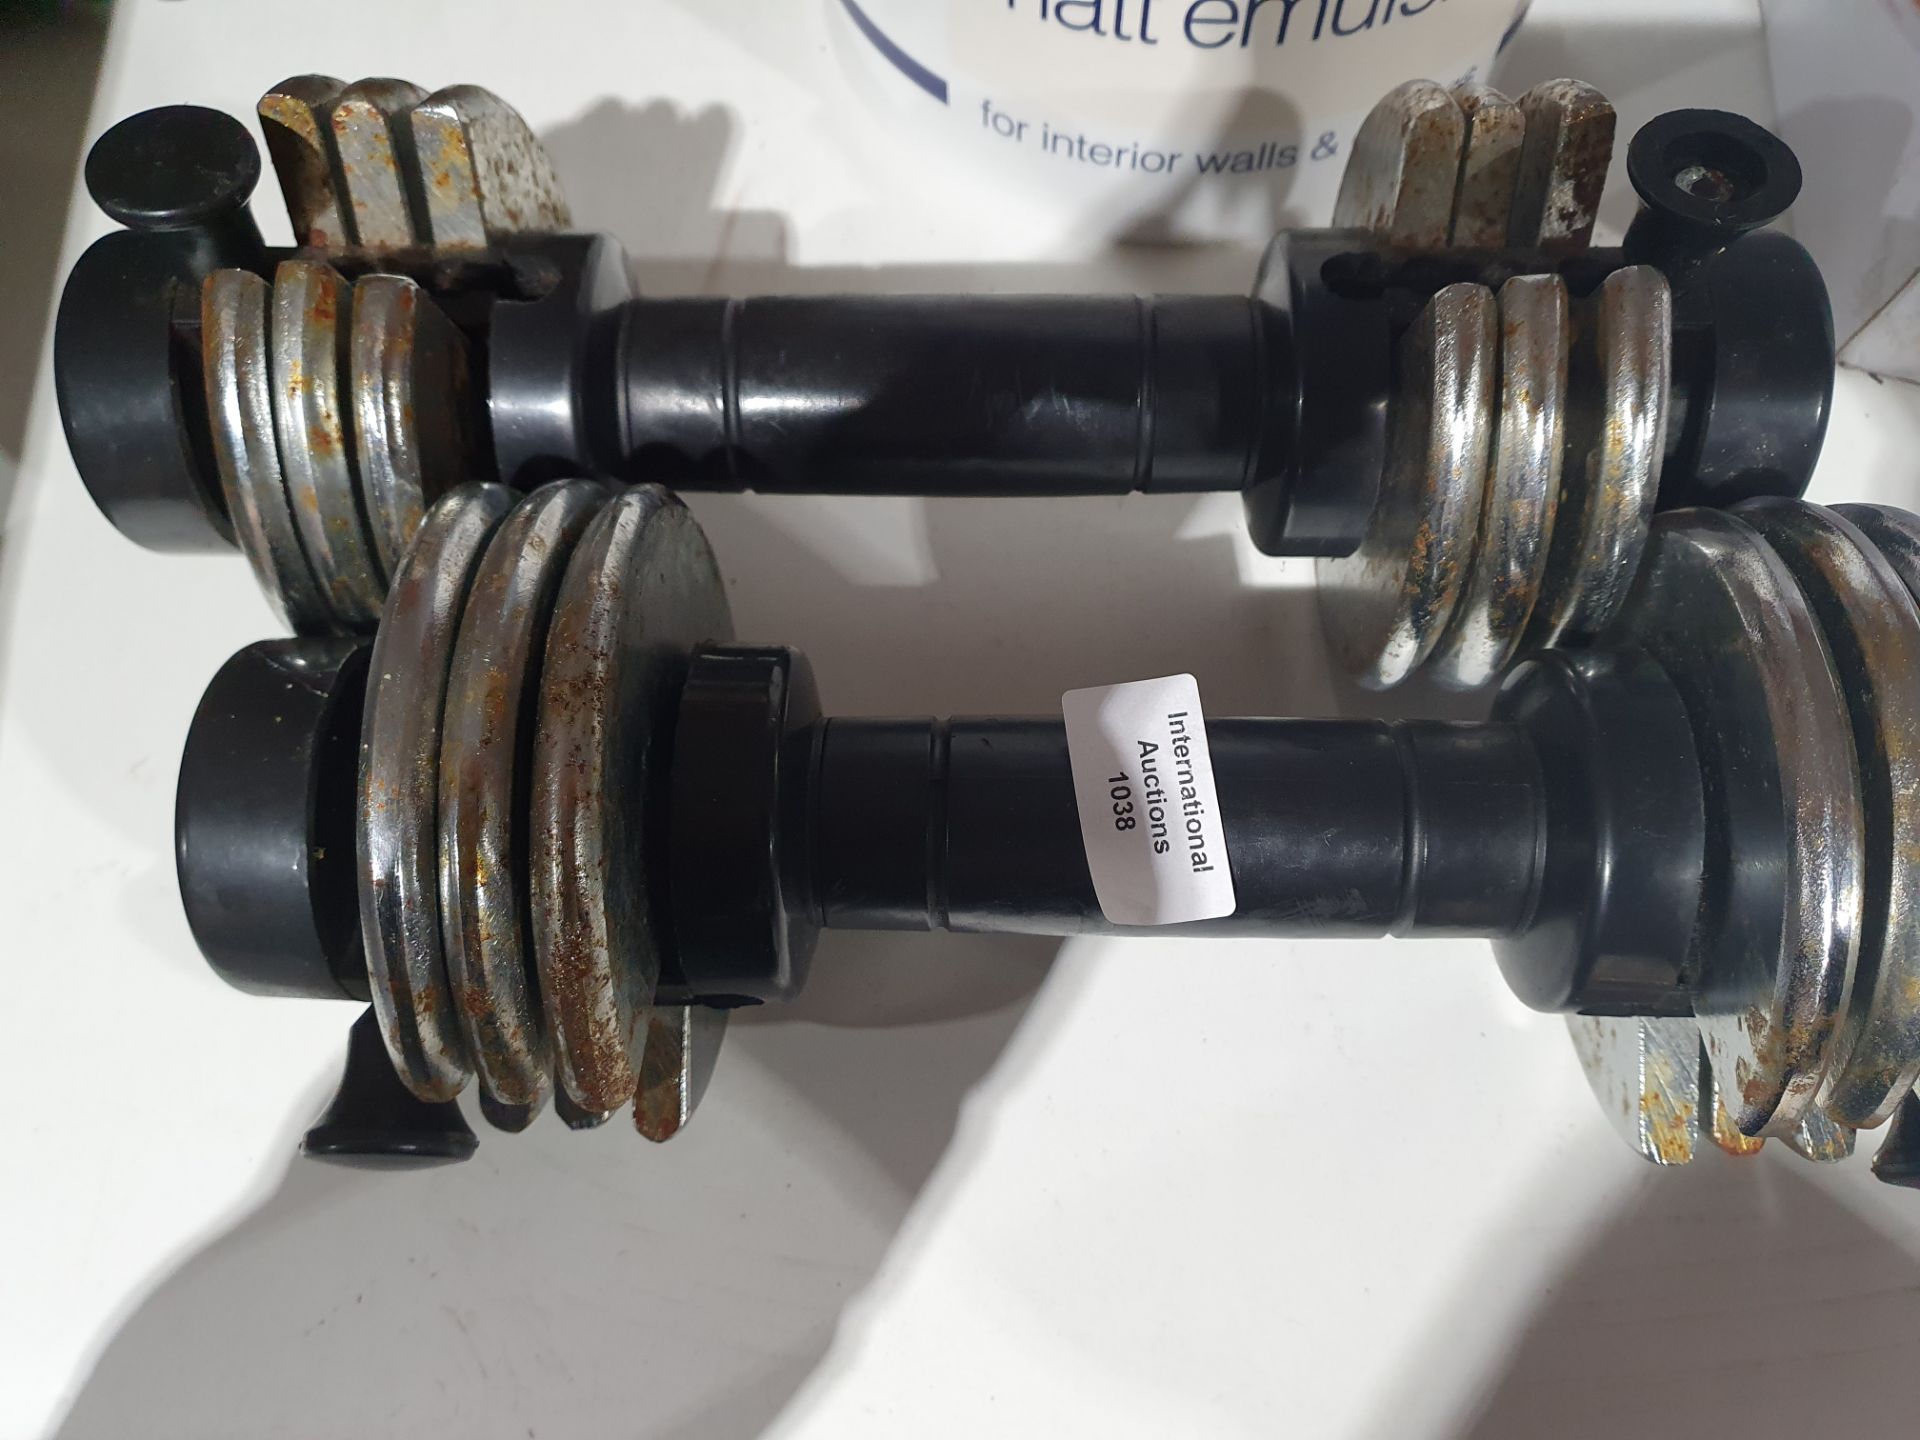 X 2 DUMBELL WEIGHTS Condition ReportAppraisal Available on Request - All Items are Unchecked/